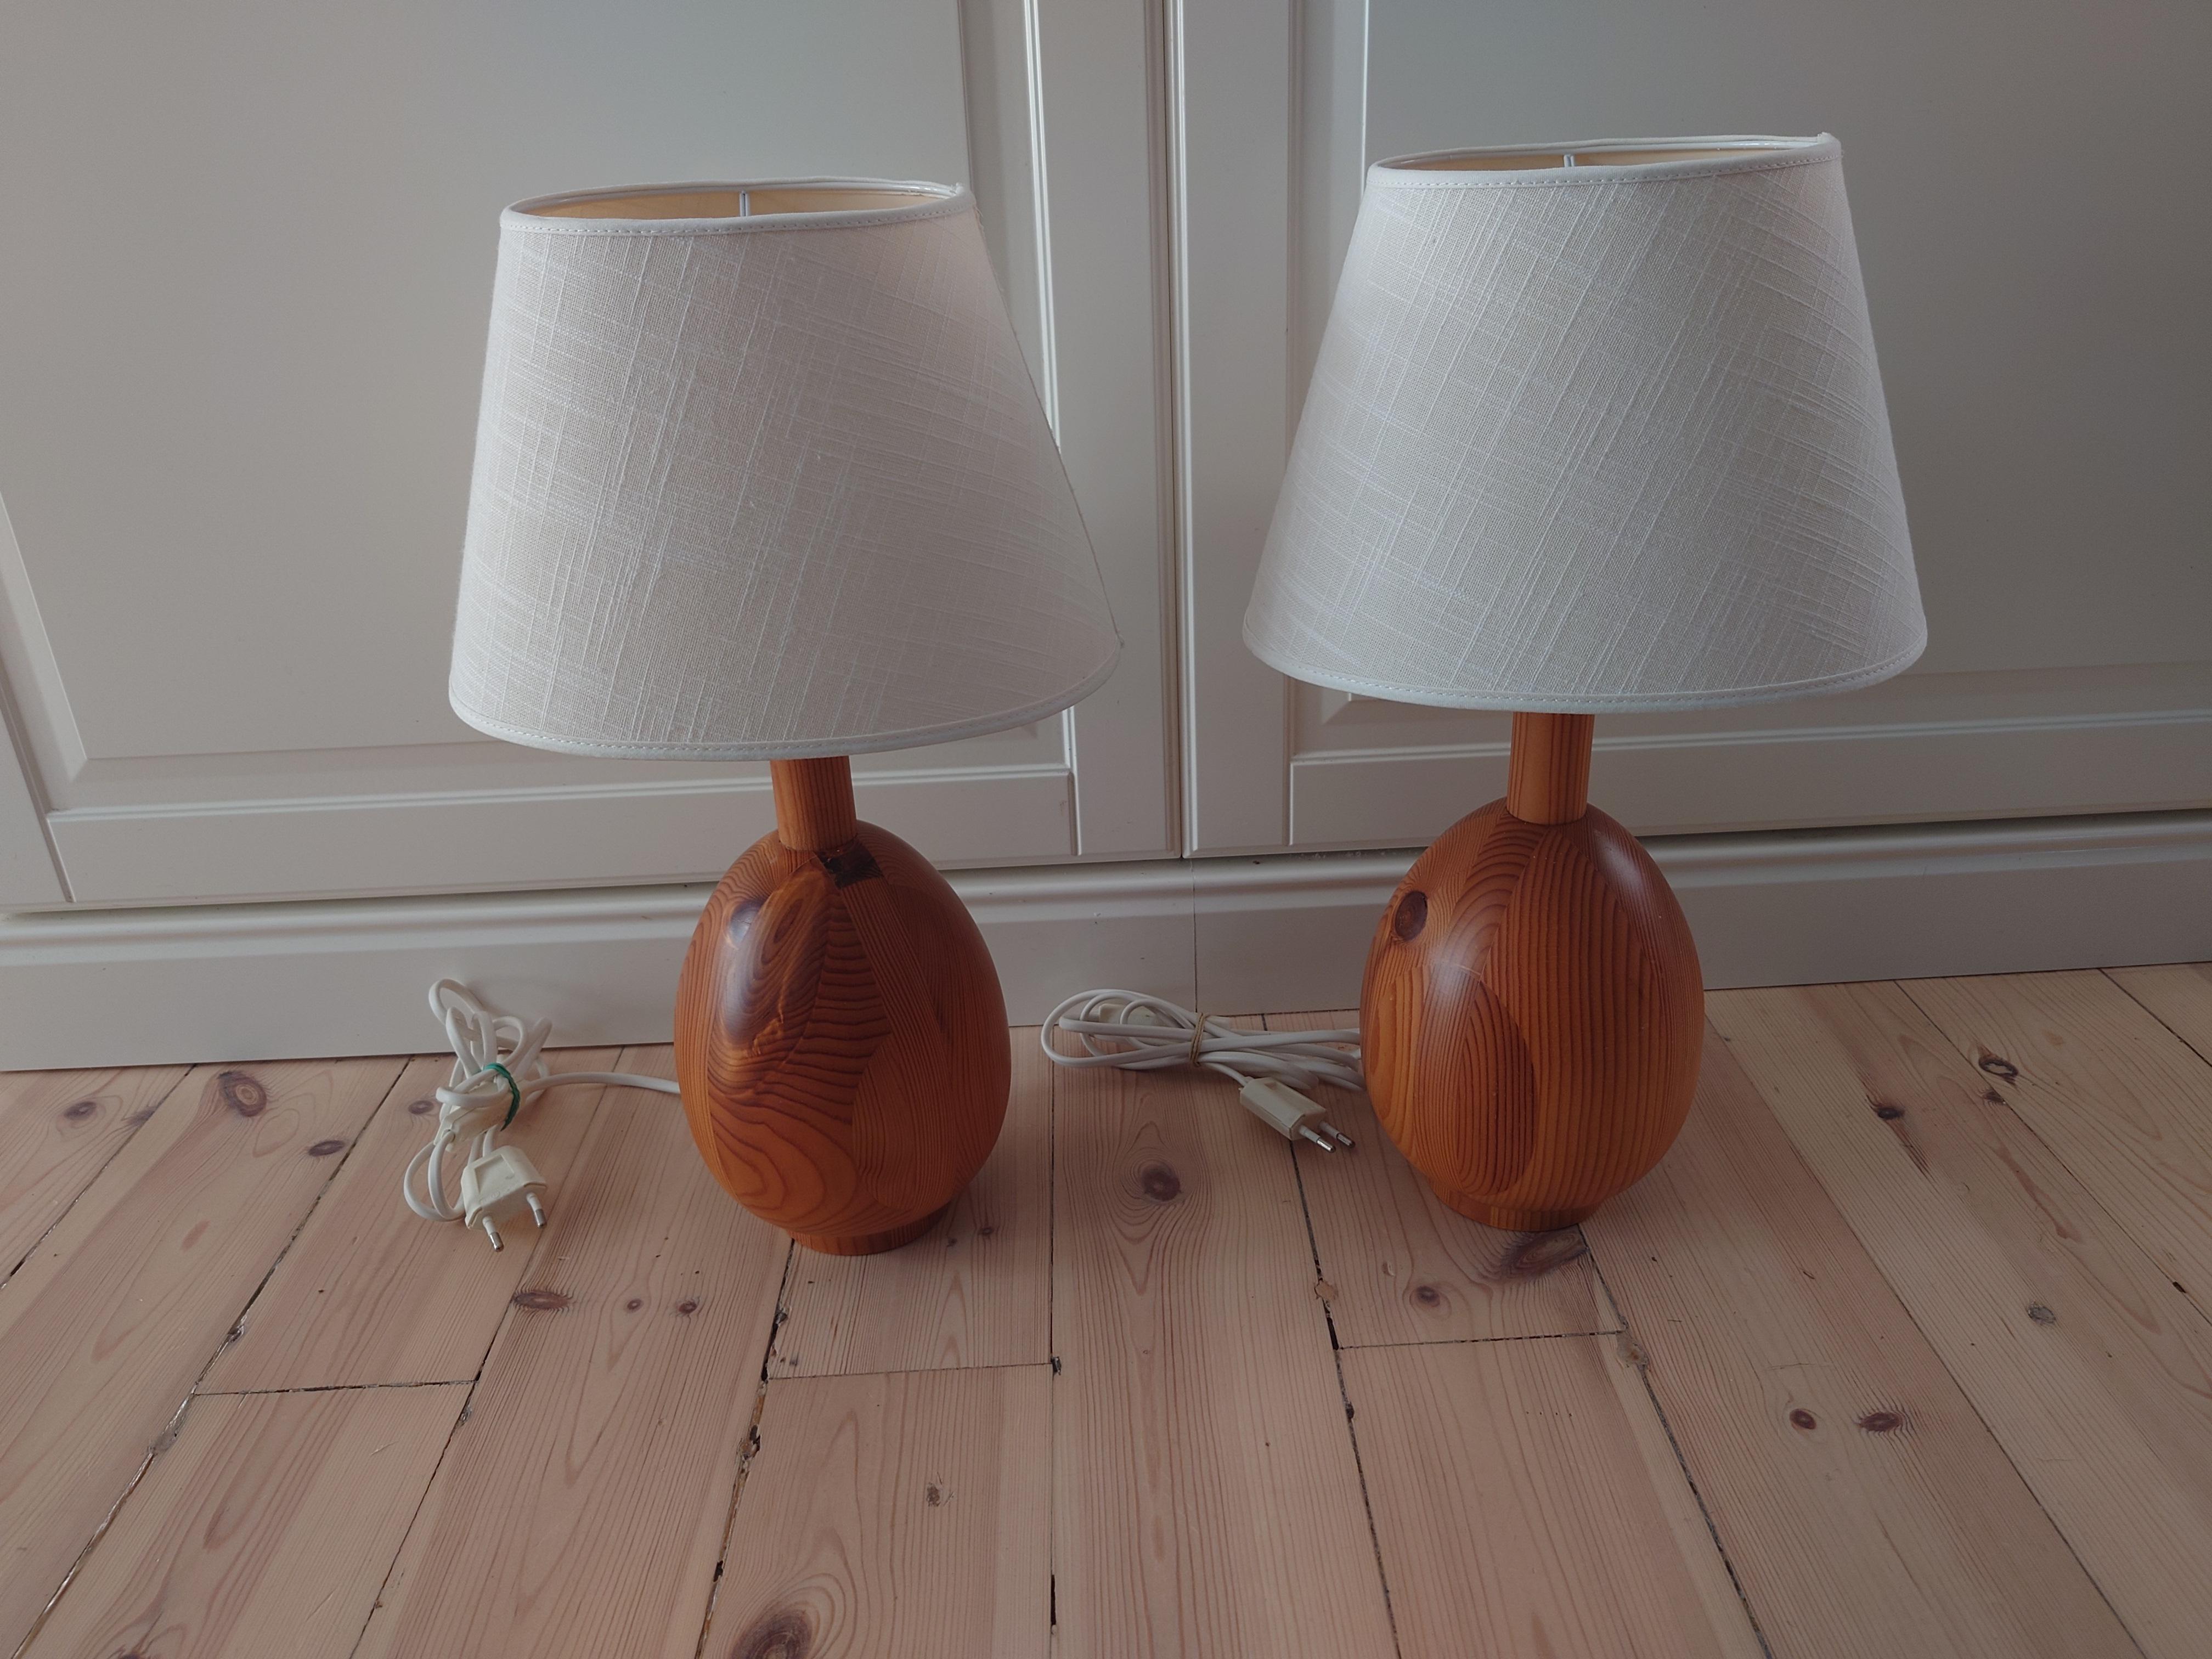 These Markslöjd Kinna lamps are the perfect combination of rustic charm and elegant design. With their pine lamp bases and linen lampshades in a beautiful bone white color, they will add a touch of warmth and style to any room. 
The heigt of the